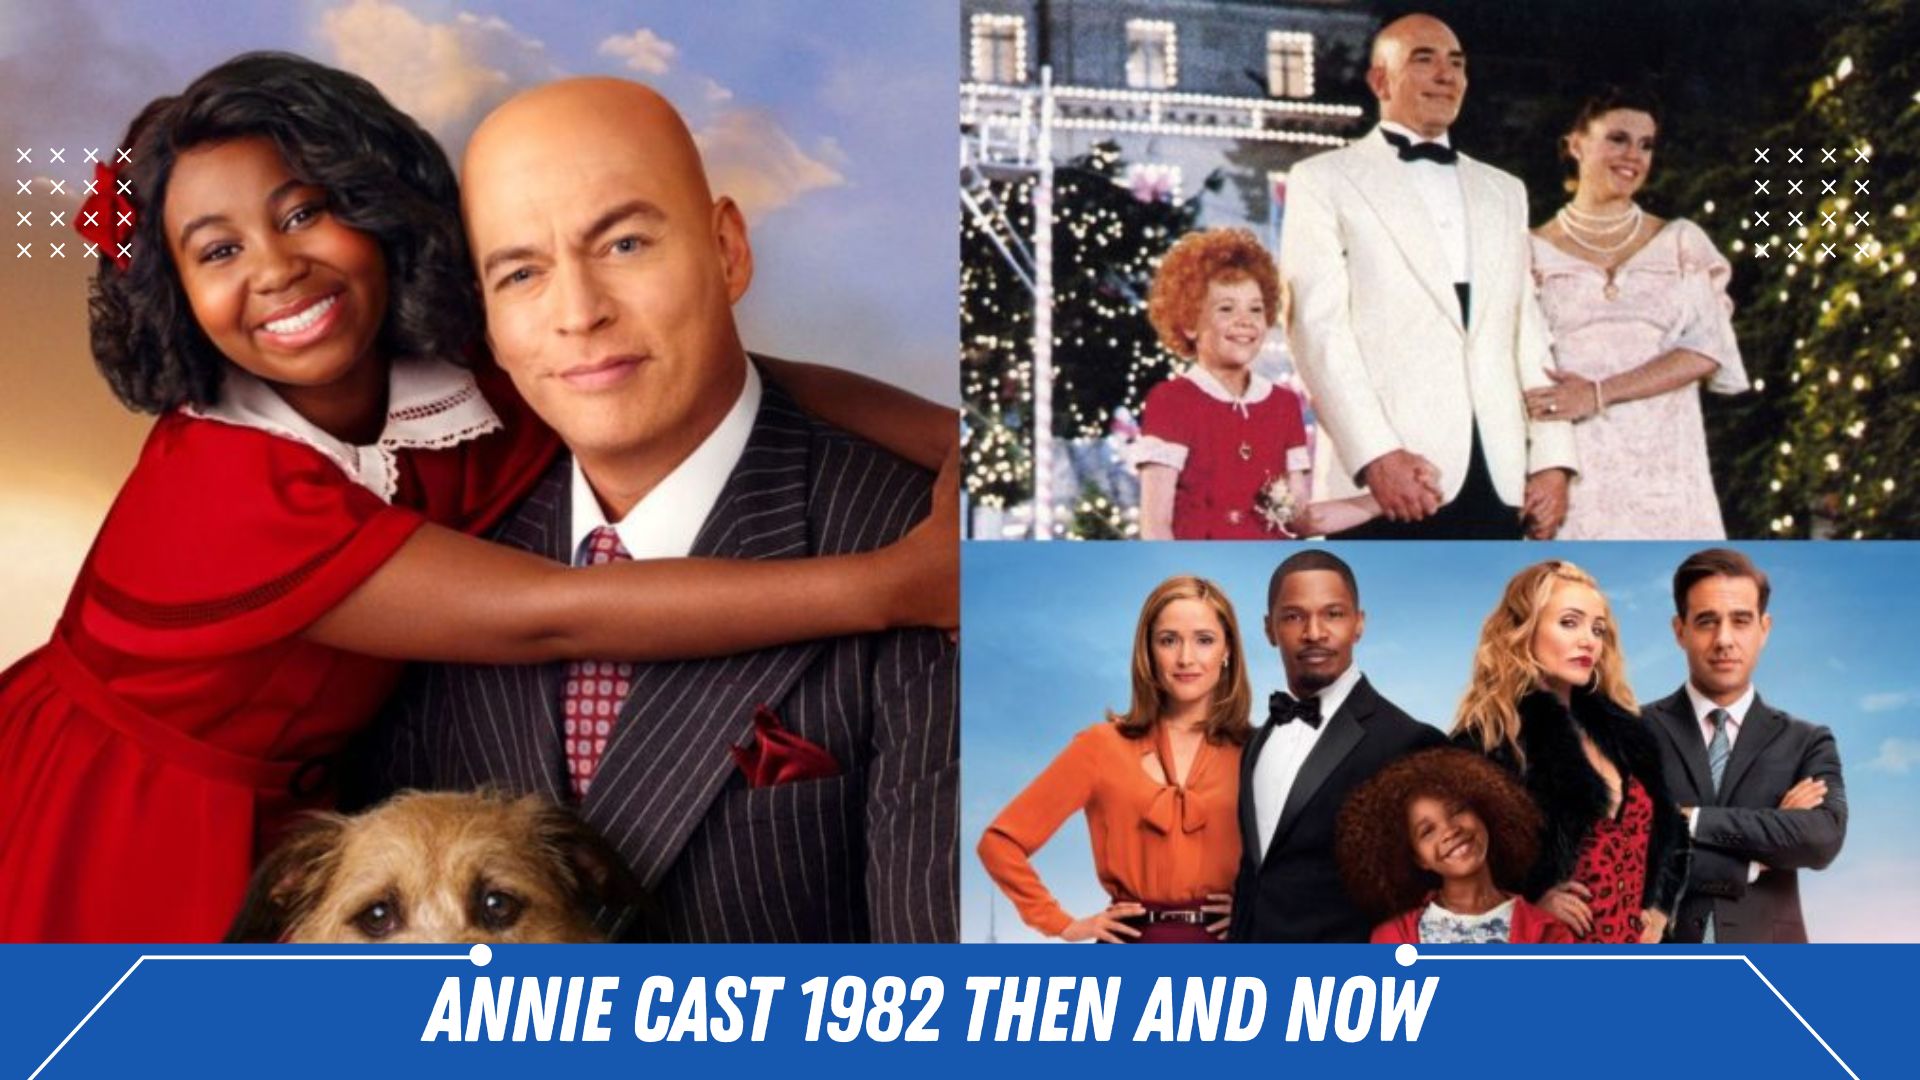 annie cast 1982 then and now